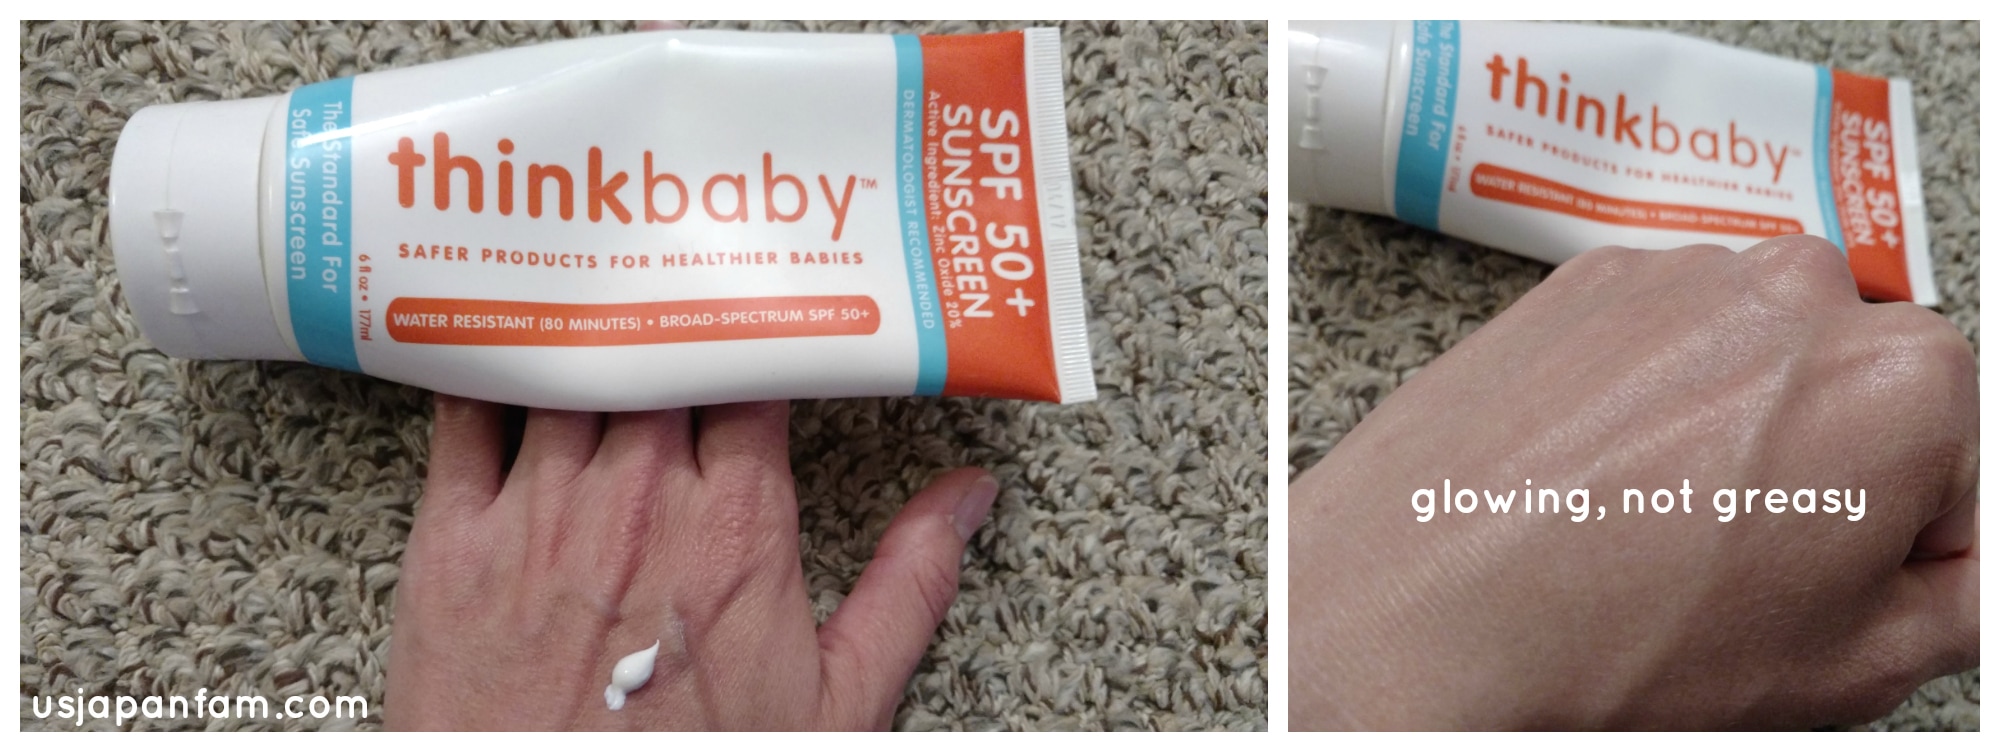 US Japan Fam reviews & loves thinkbaby sunscreen - it leaves you glowing, not greasy!